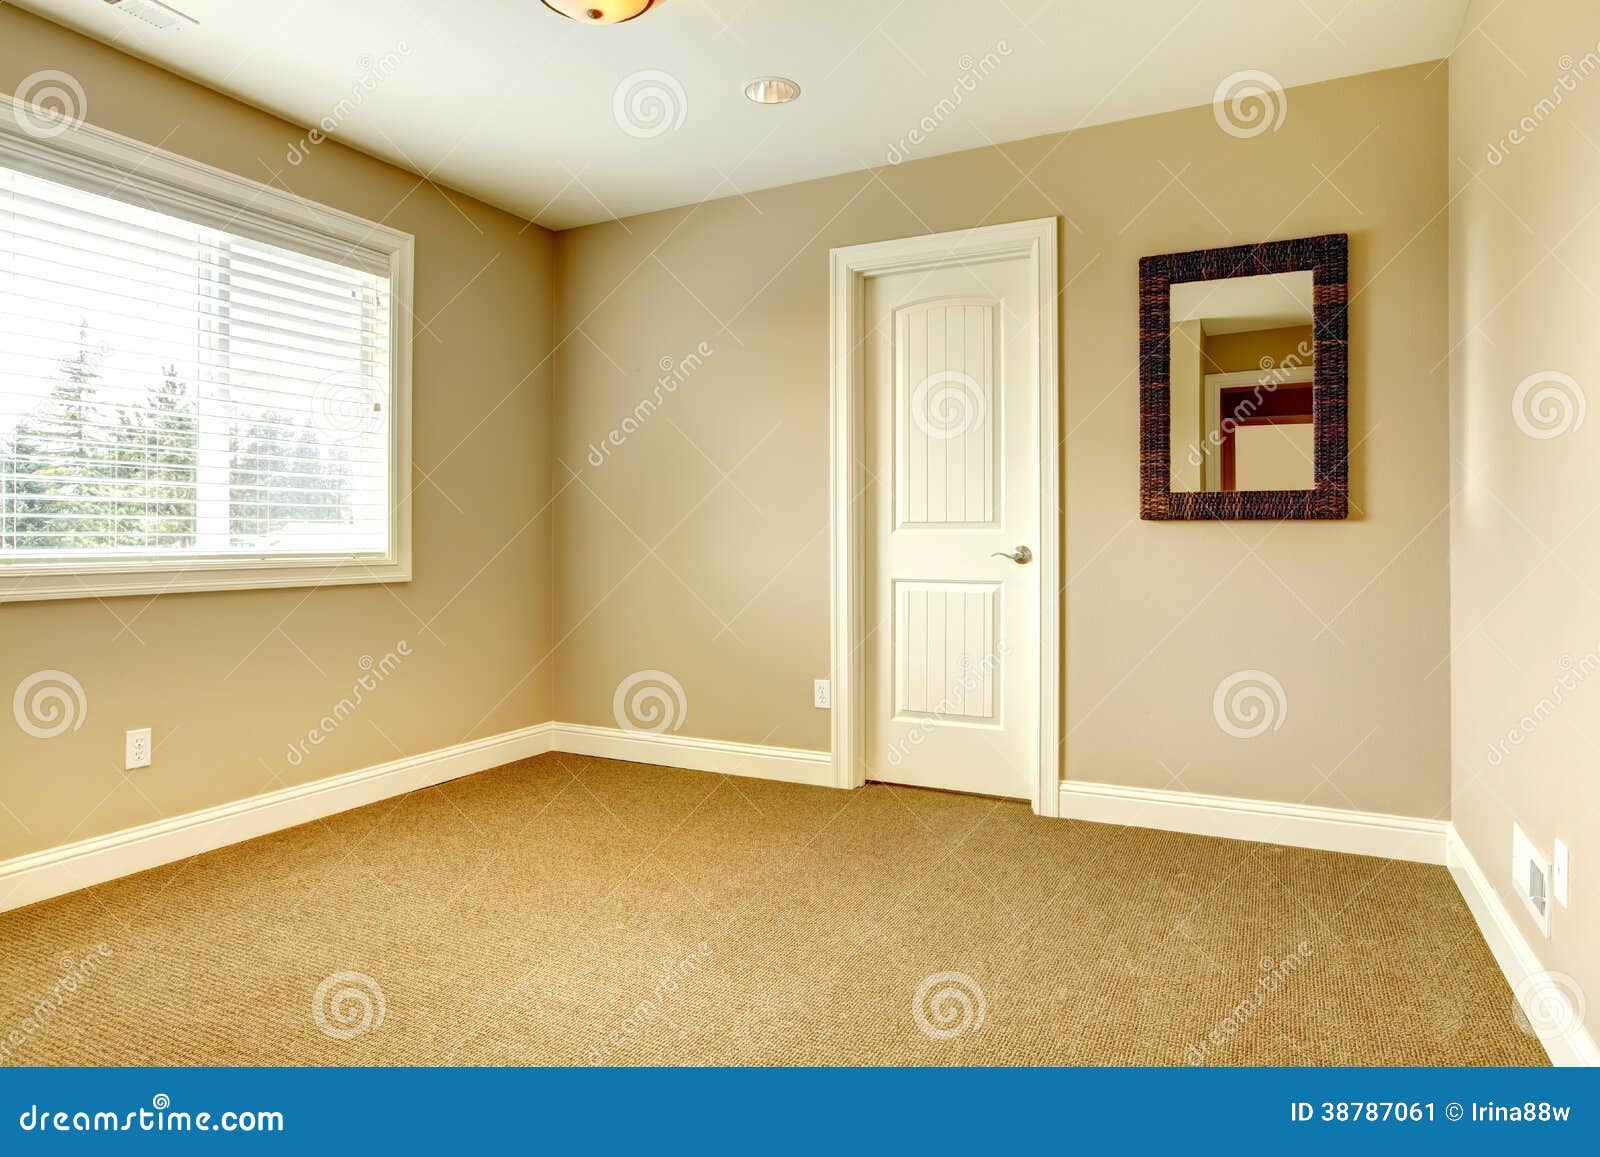 Empty room with mirror stock image. Image of house, nobody ...
